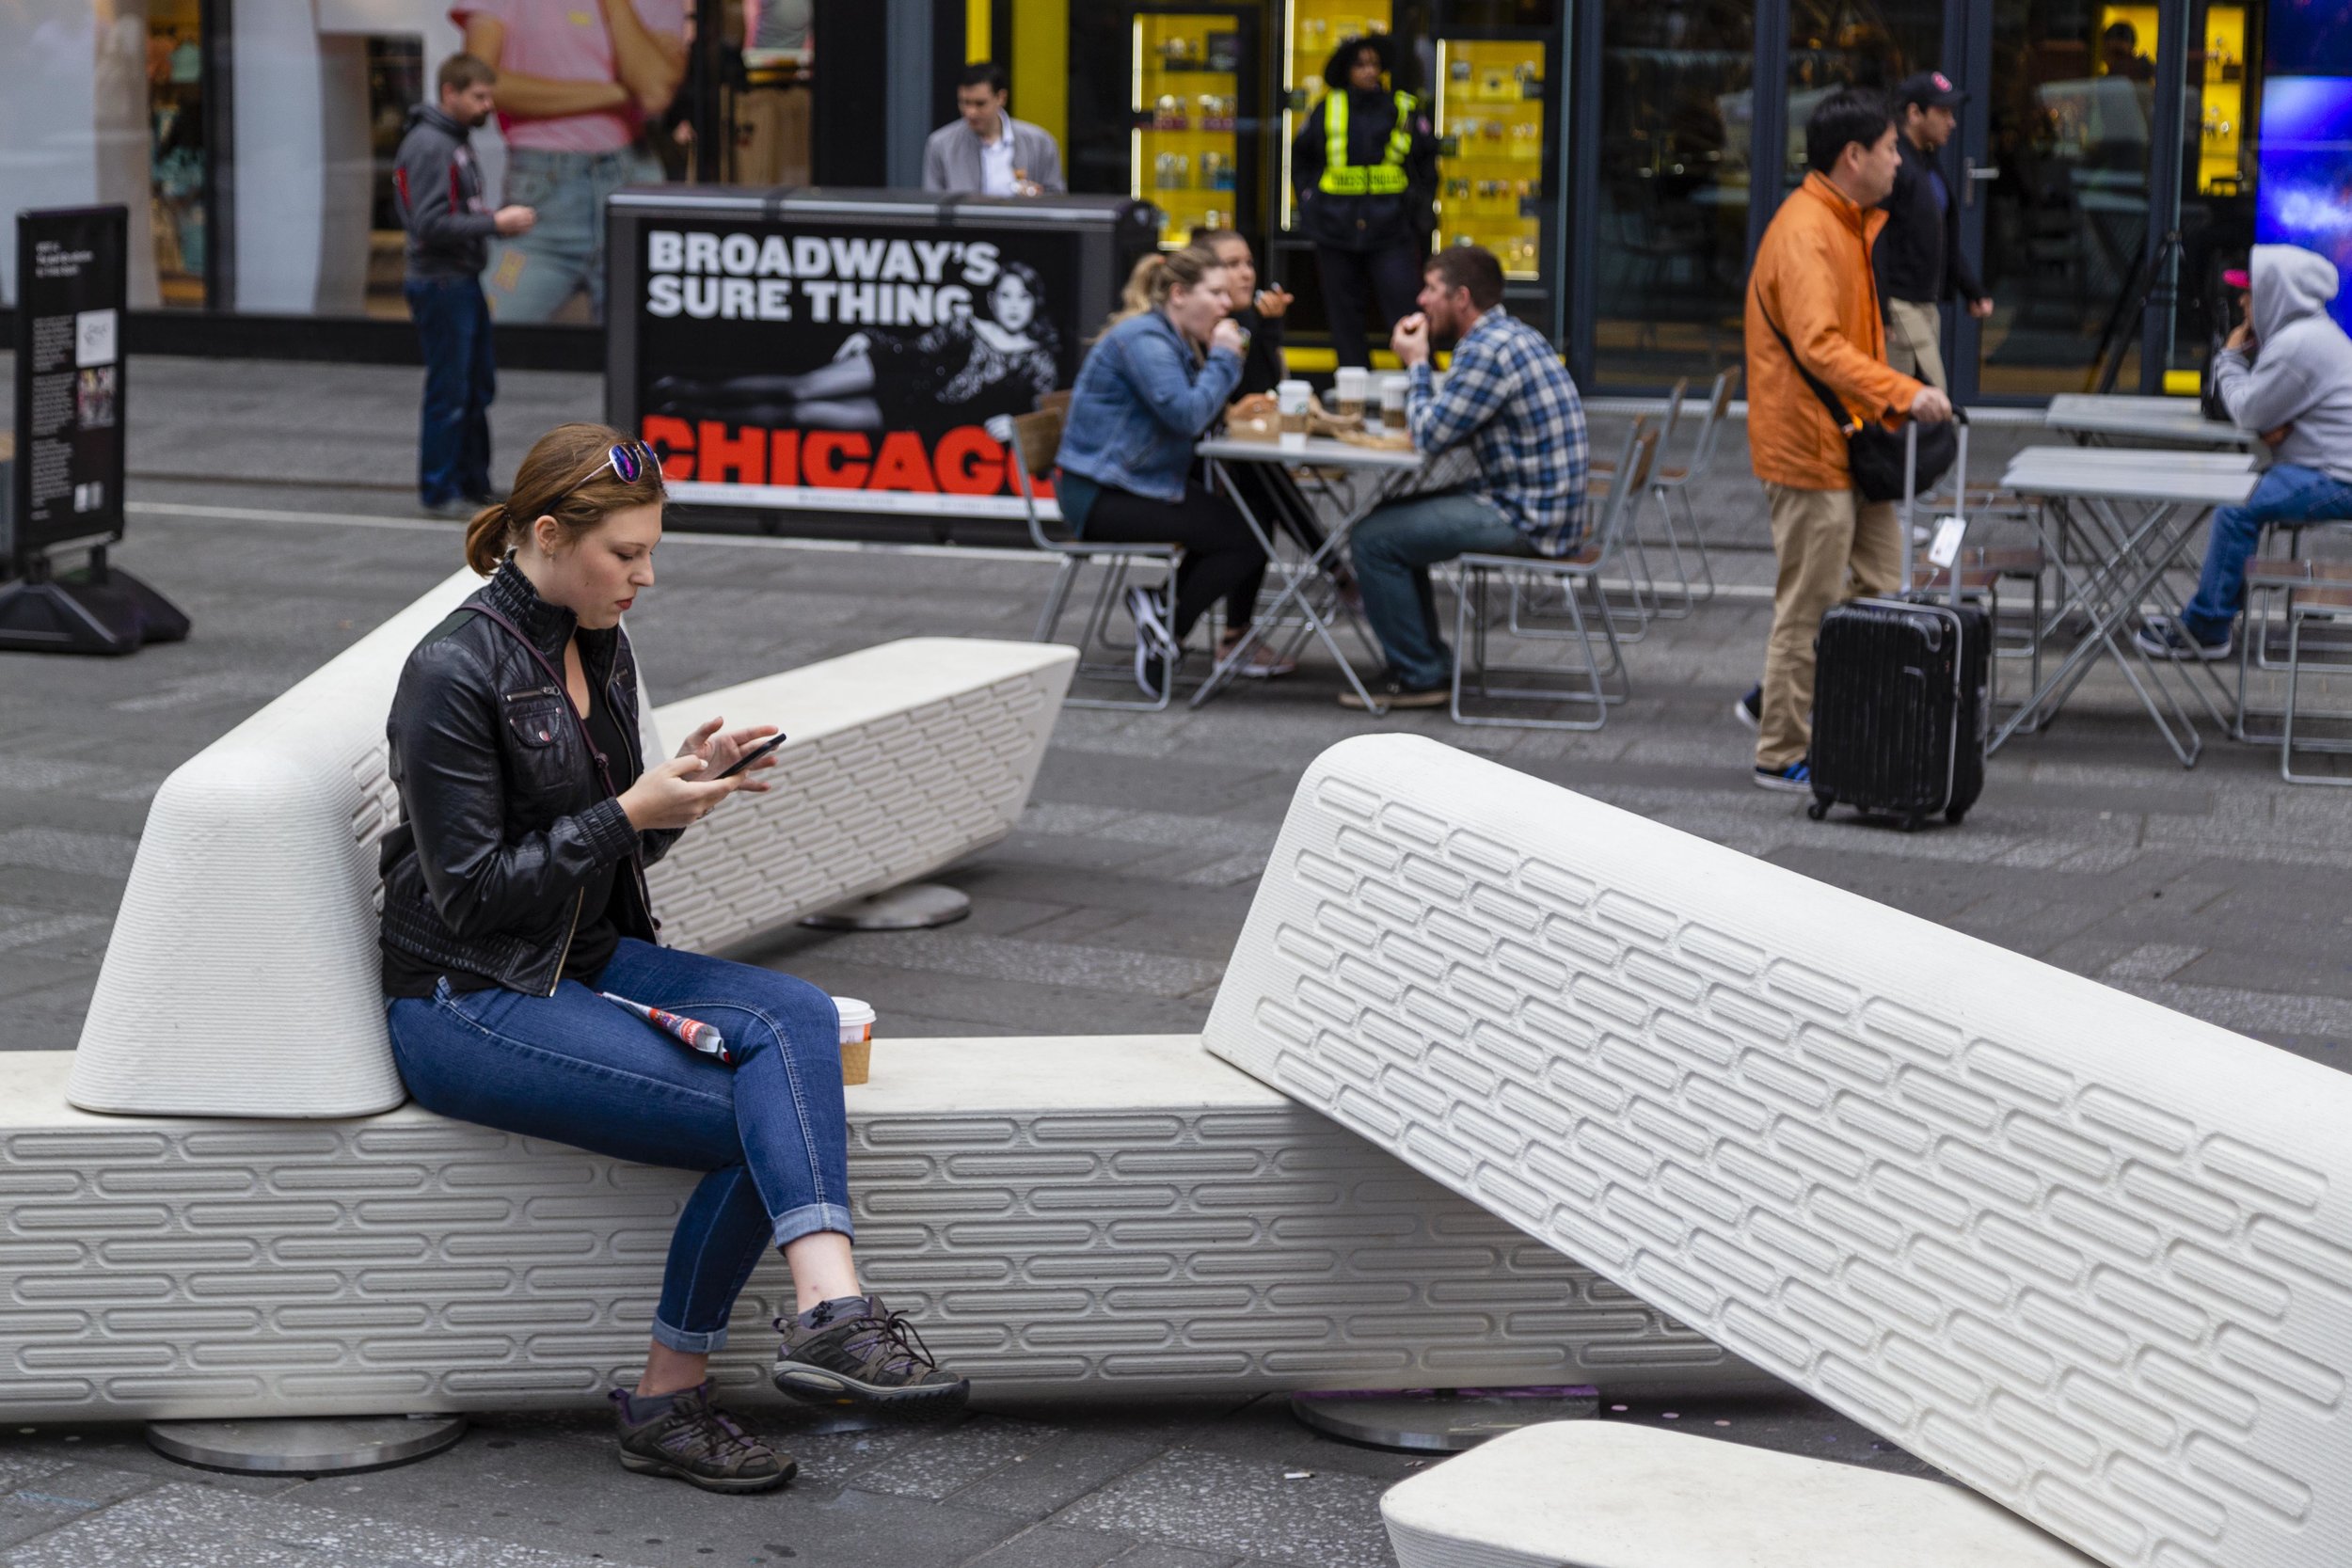 New 3D-printed, crash-proof benches Square Times in debut